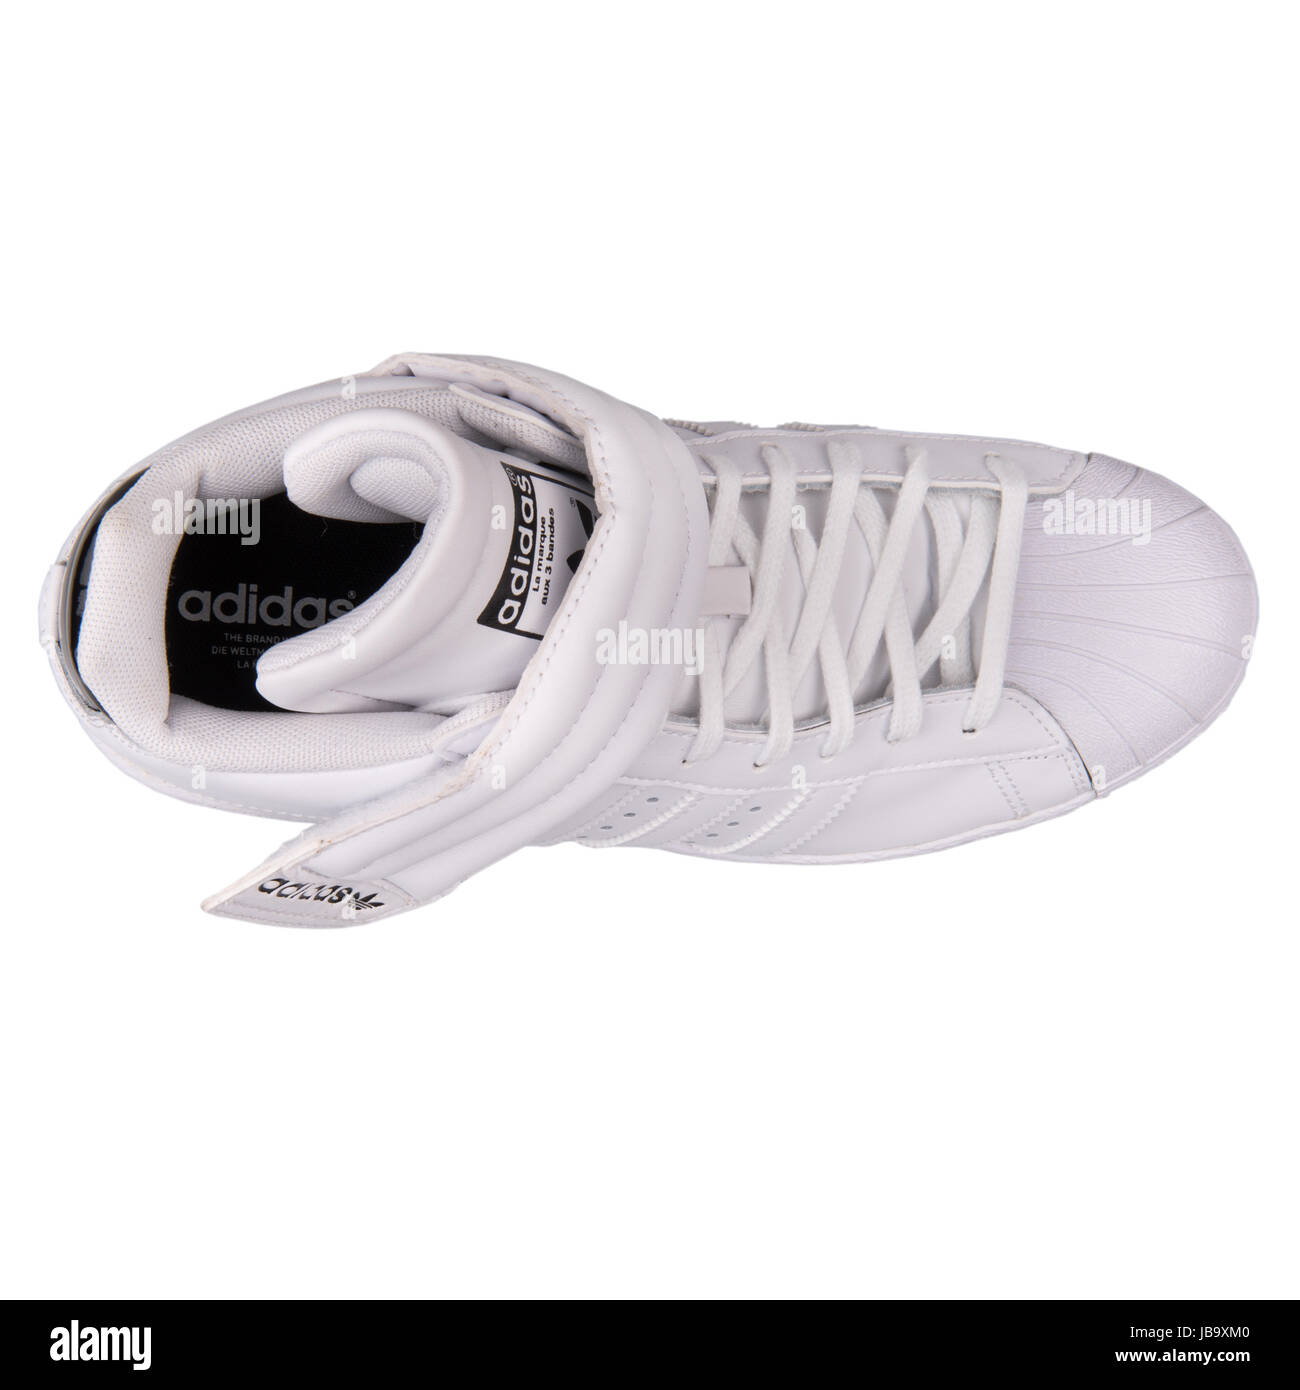 Adidas Superstar UP Strap W White Women's Shoes - S81351 Stock Photo - Alamy